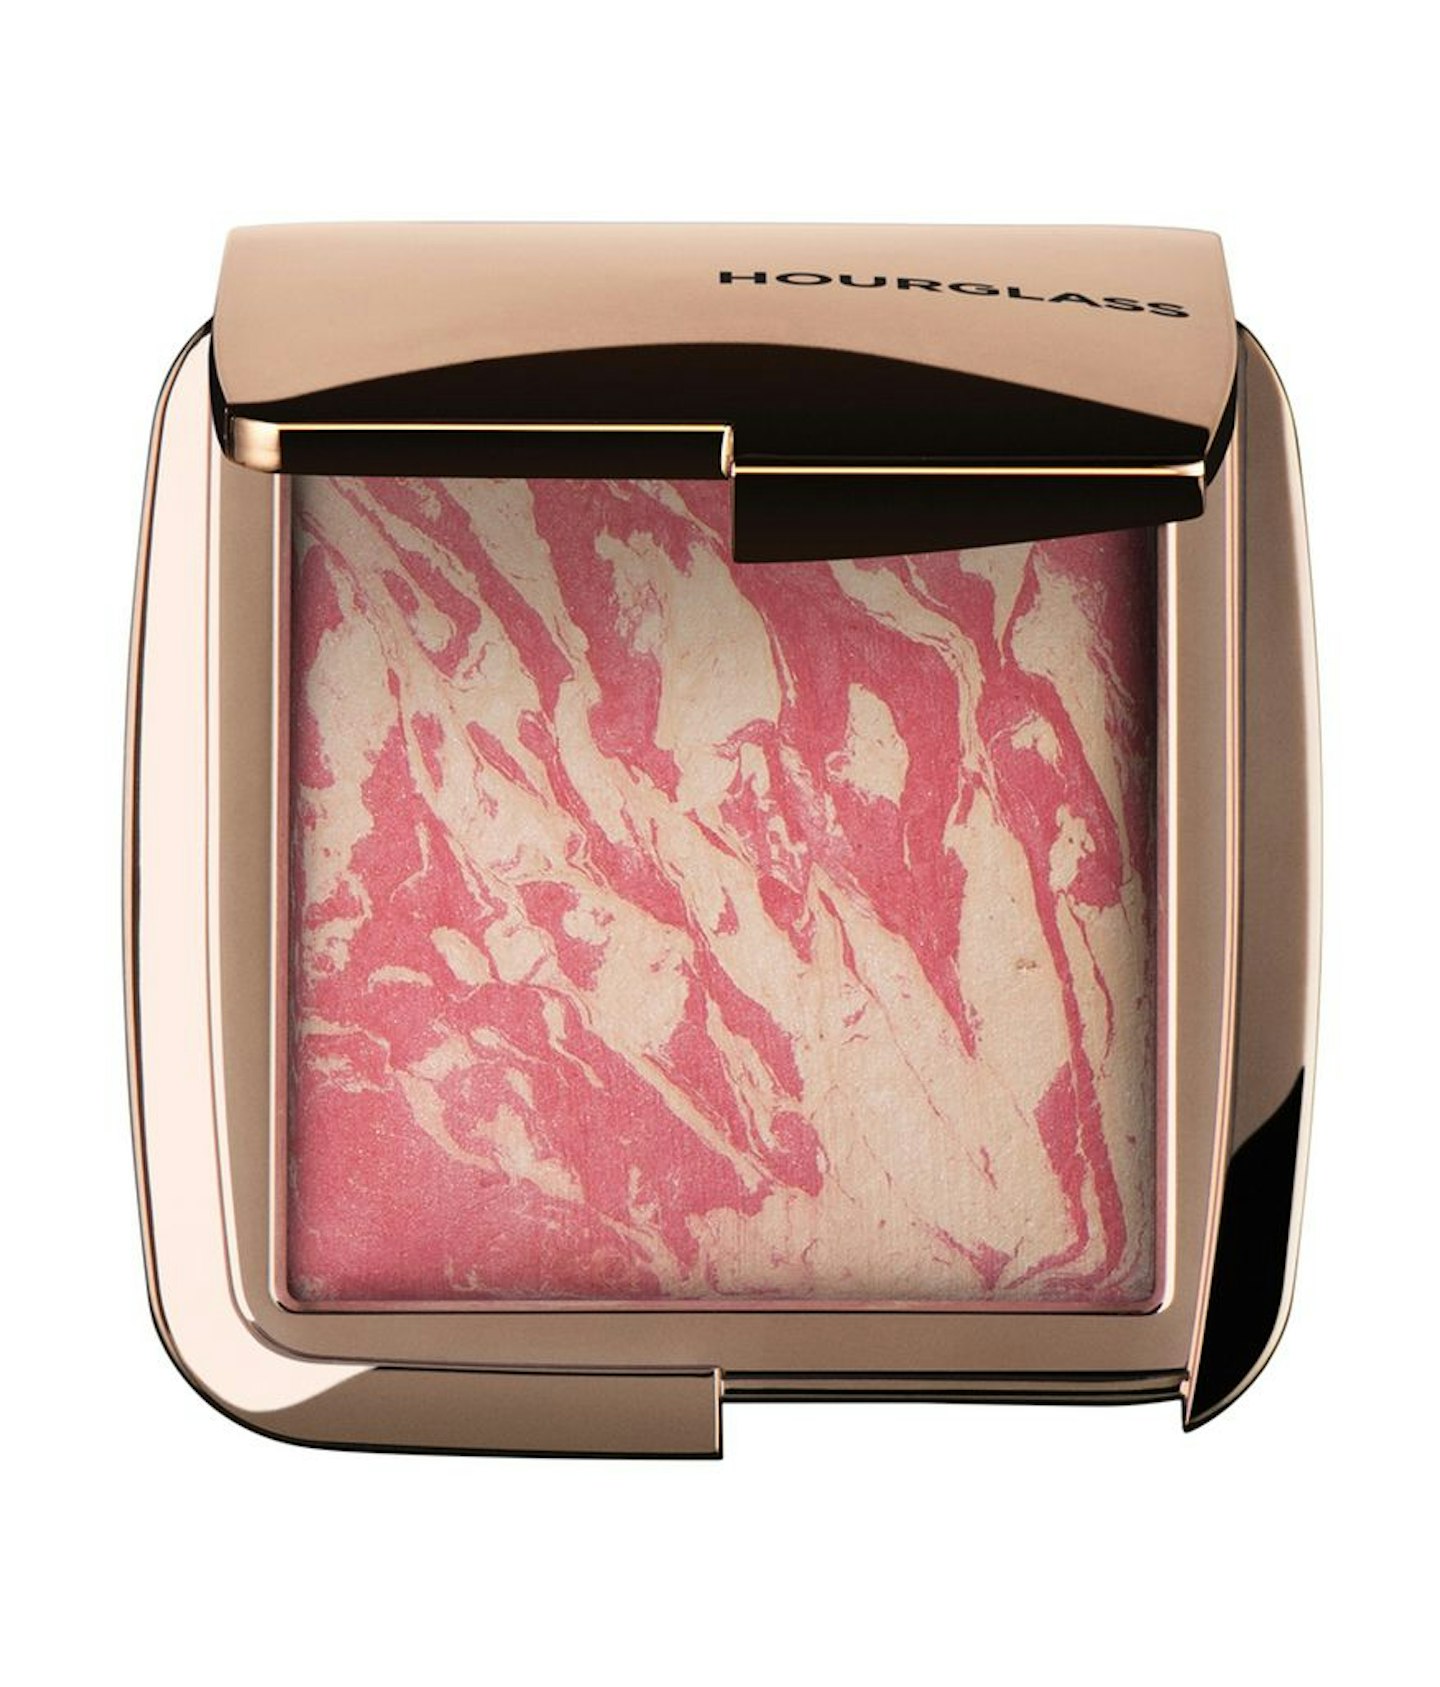 Hourglass ABest Blushers On The Market 2022mbient Lighting Blush, £35